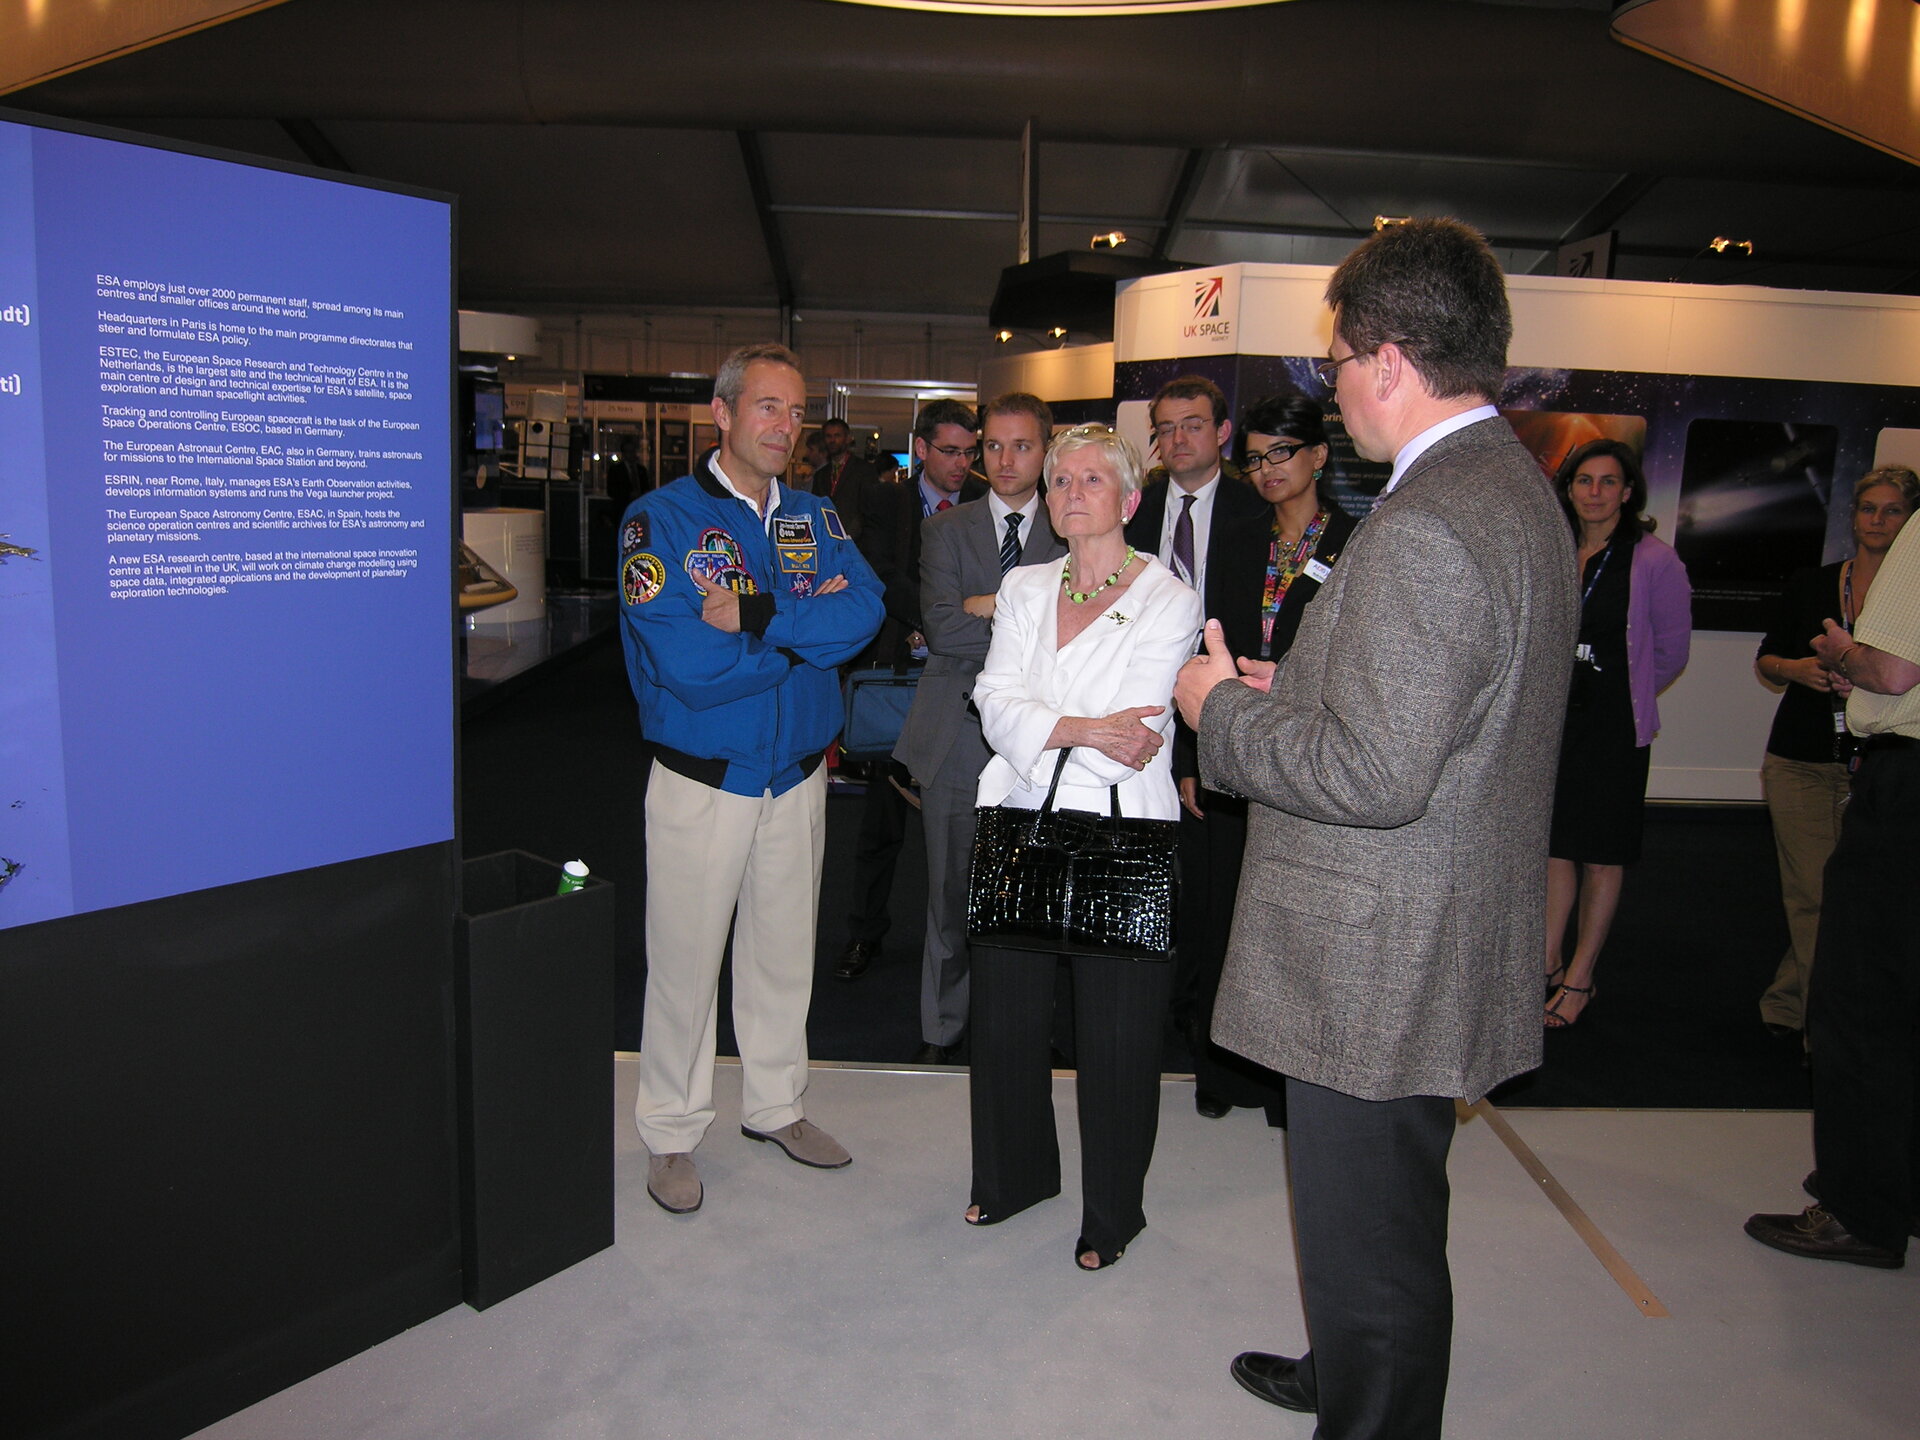 UK Minister of State for Security visits the ESA exhibition